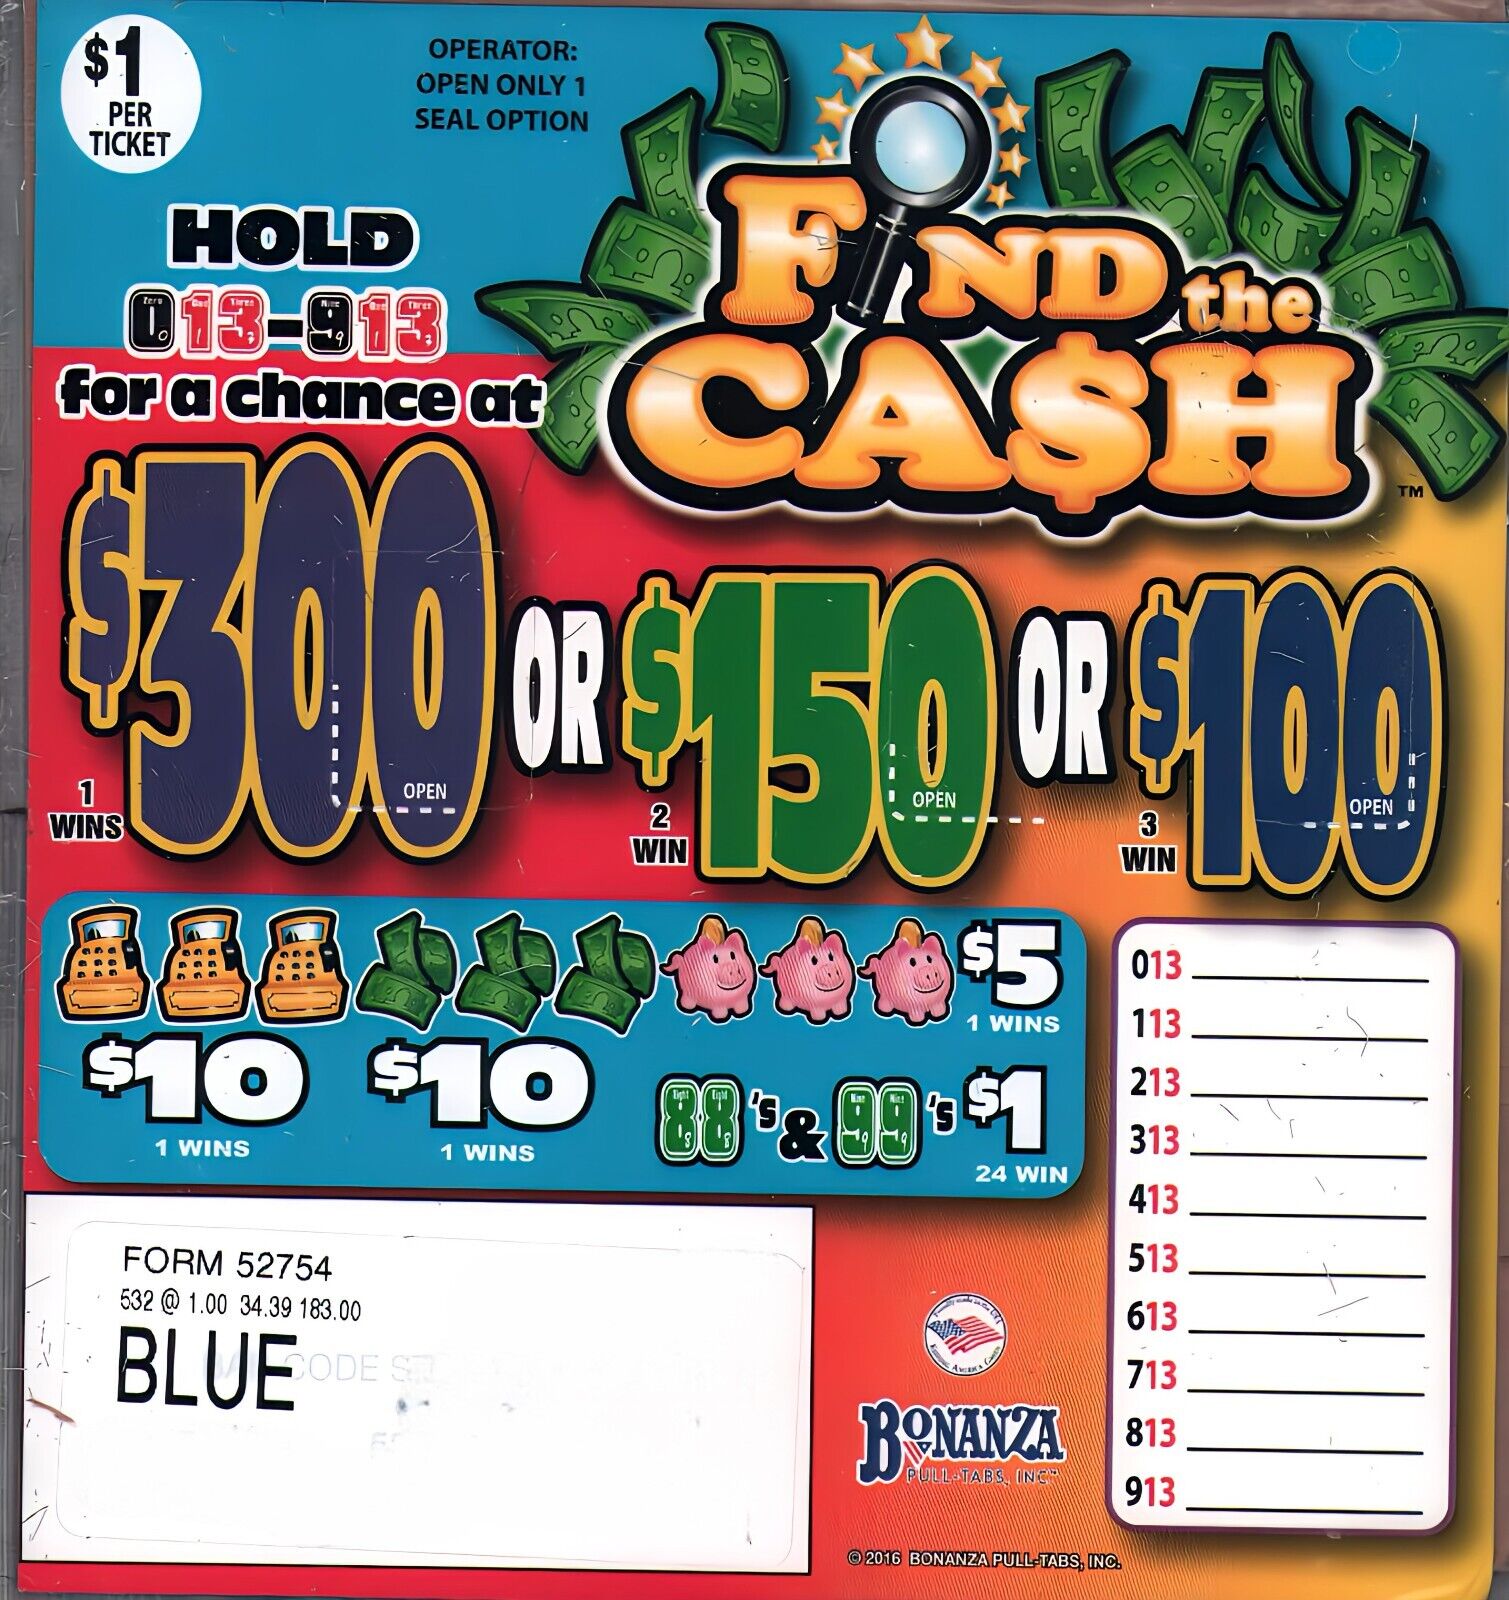 Hard Card Pull Tickets - 3 Pack Find the Cash